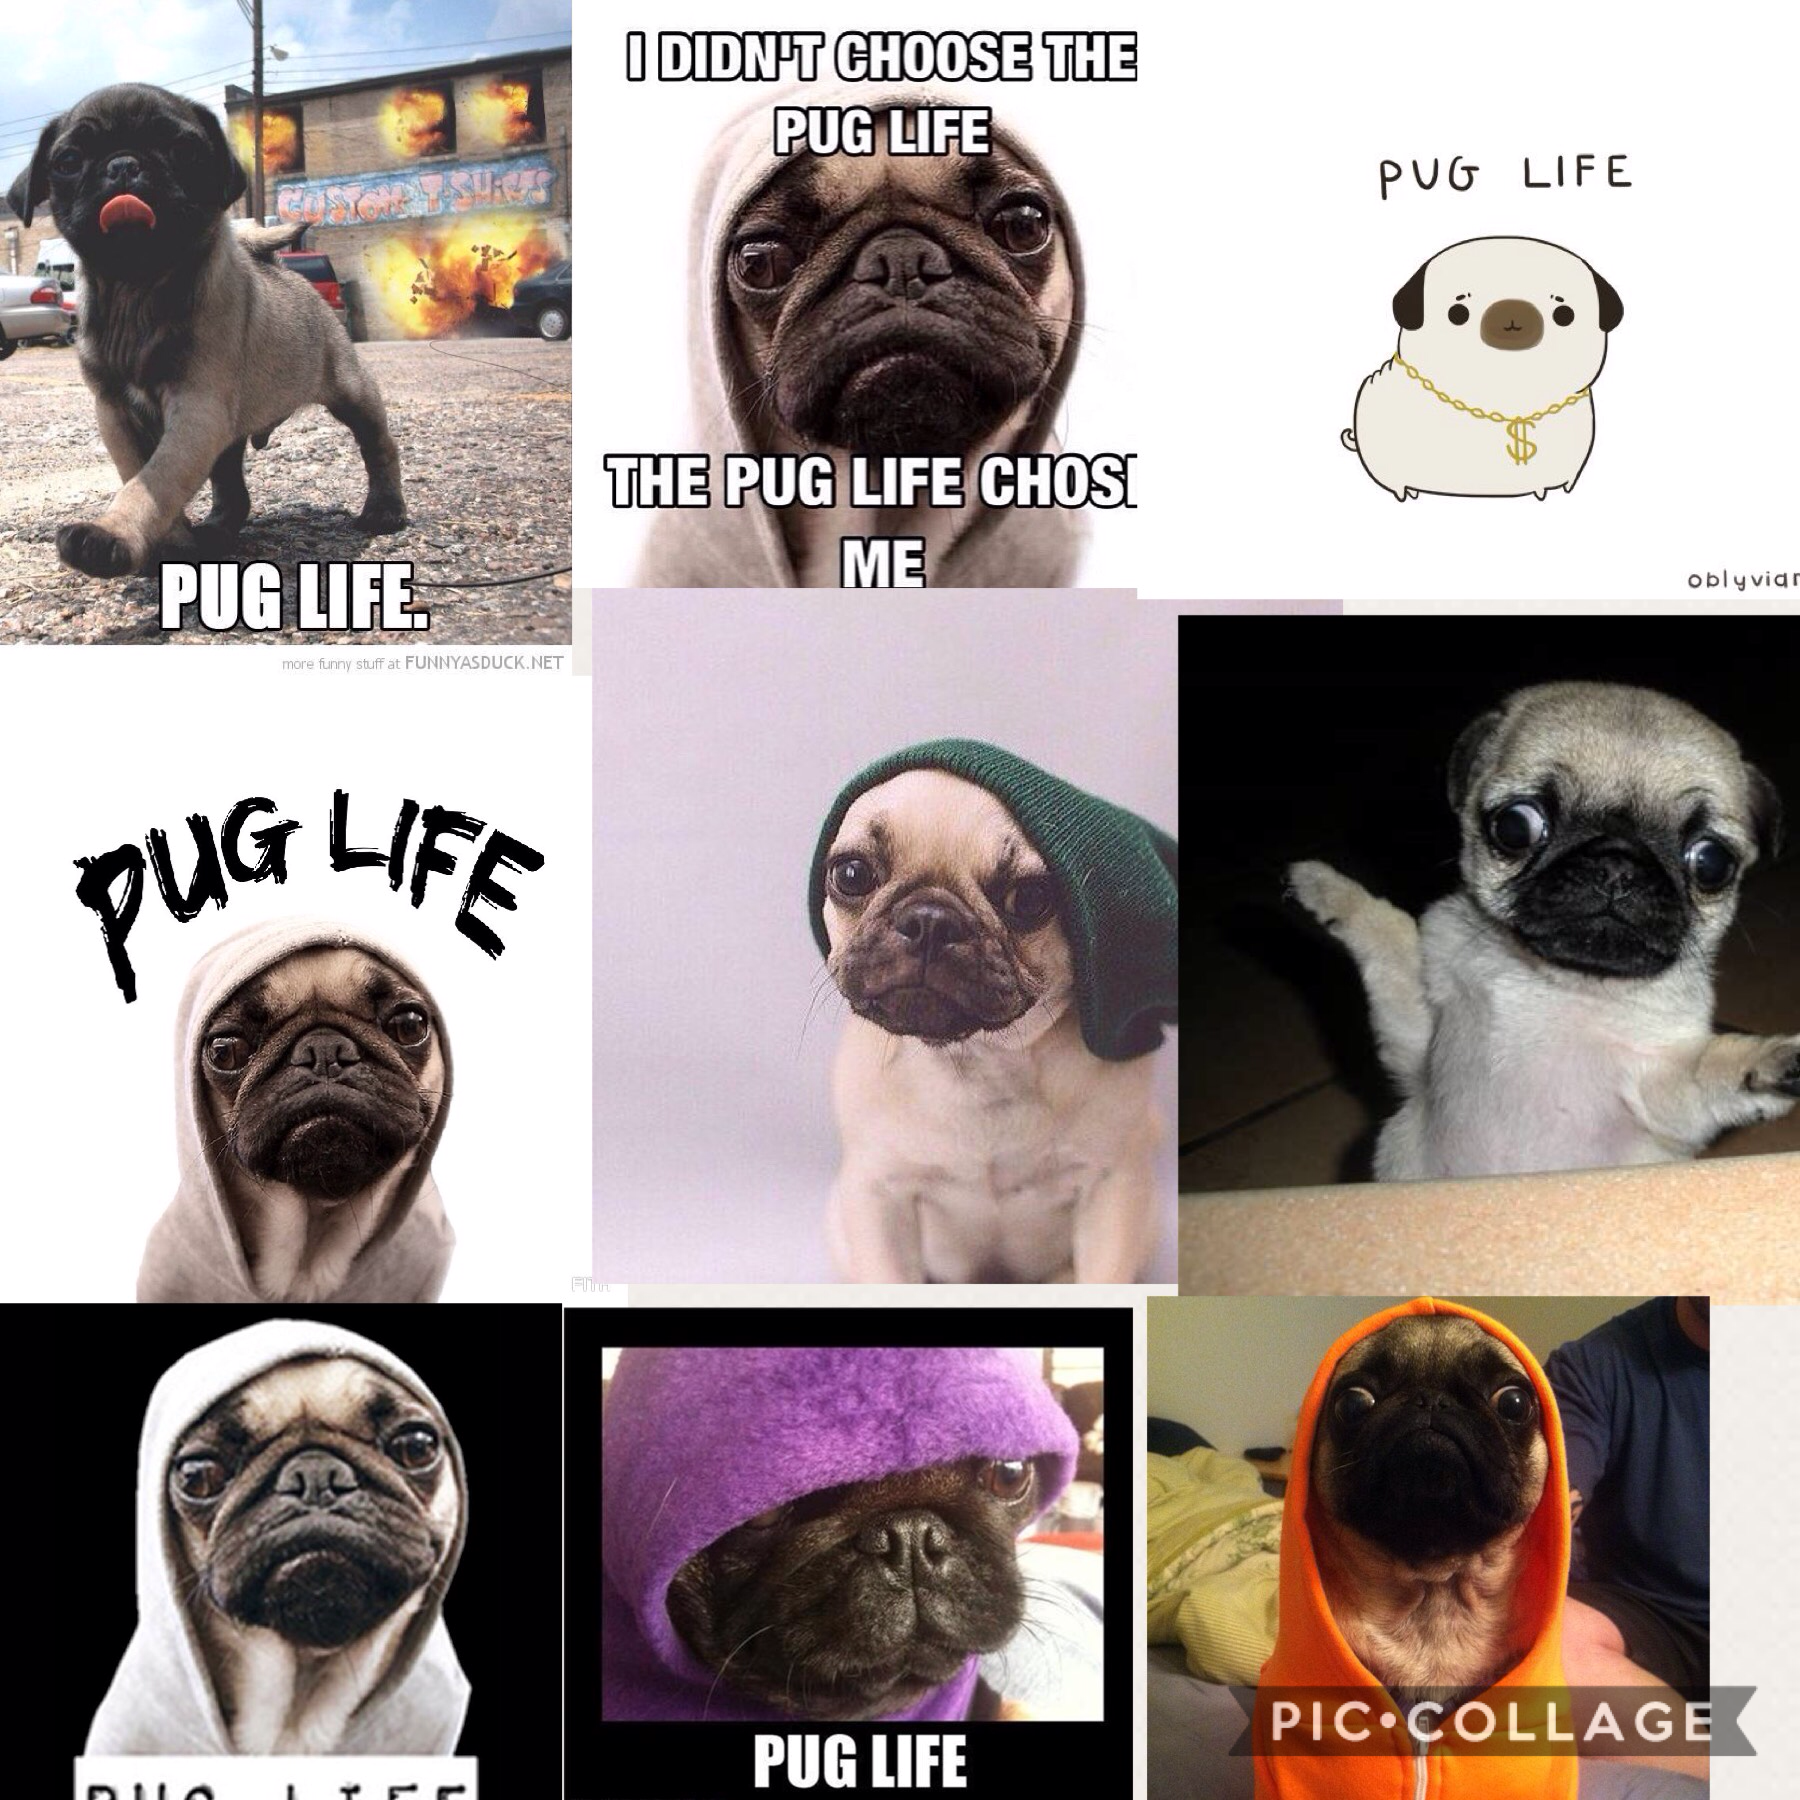 #pug life shout out to miki Maddison wardah and all my bffs😻😻😻😻😍☺️luv u all